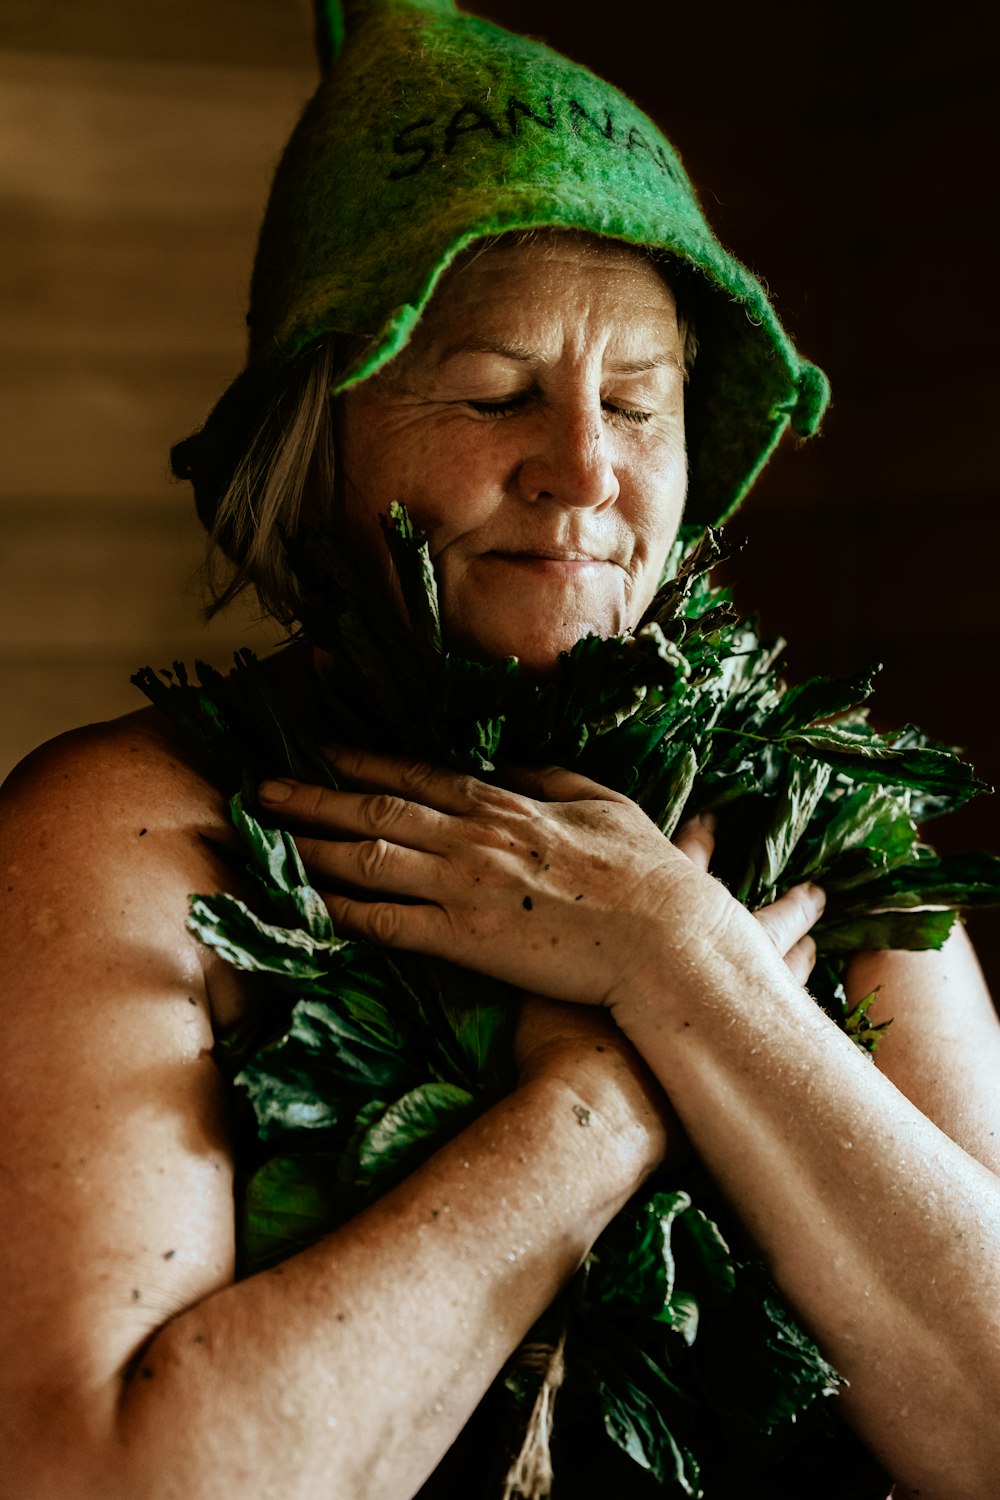 a person holding a plant